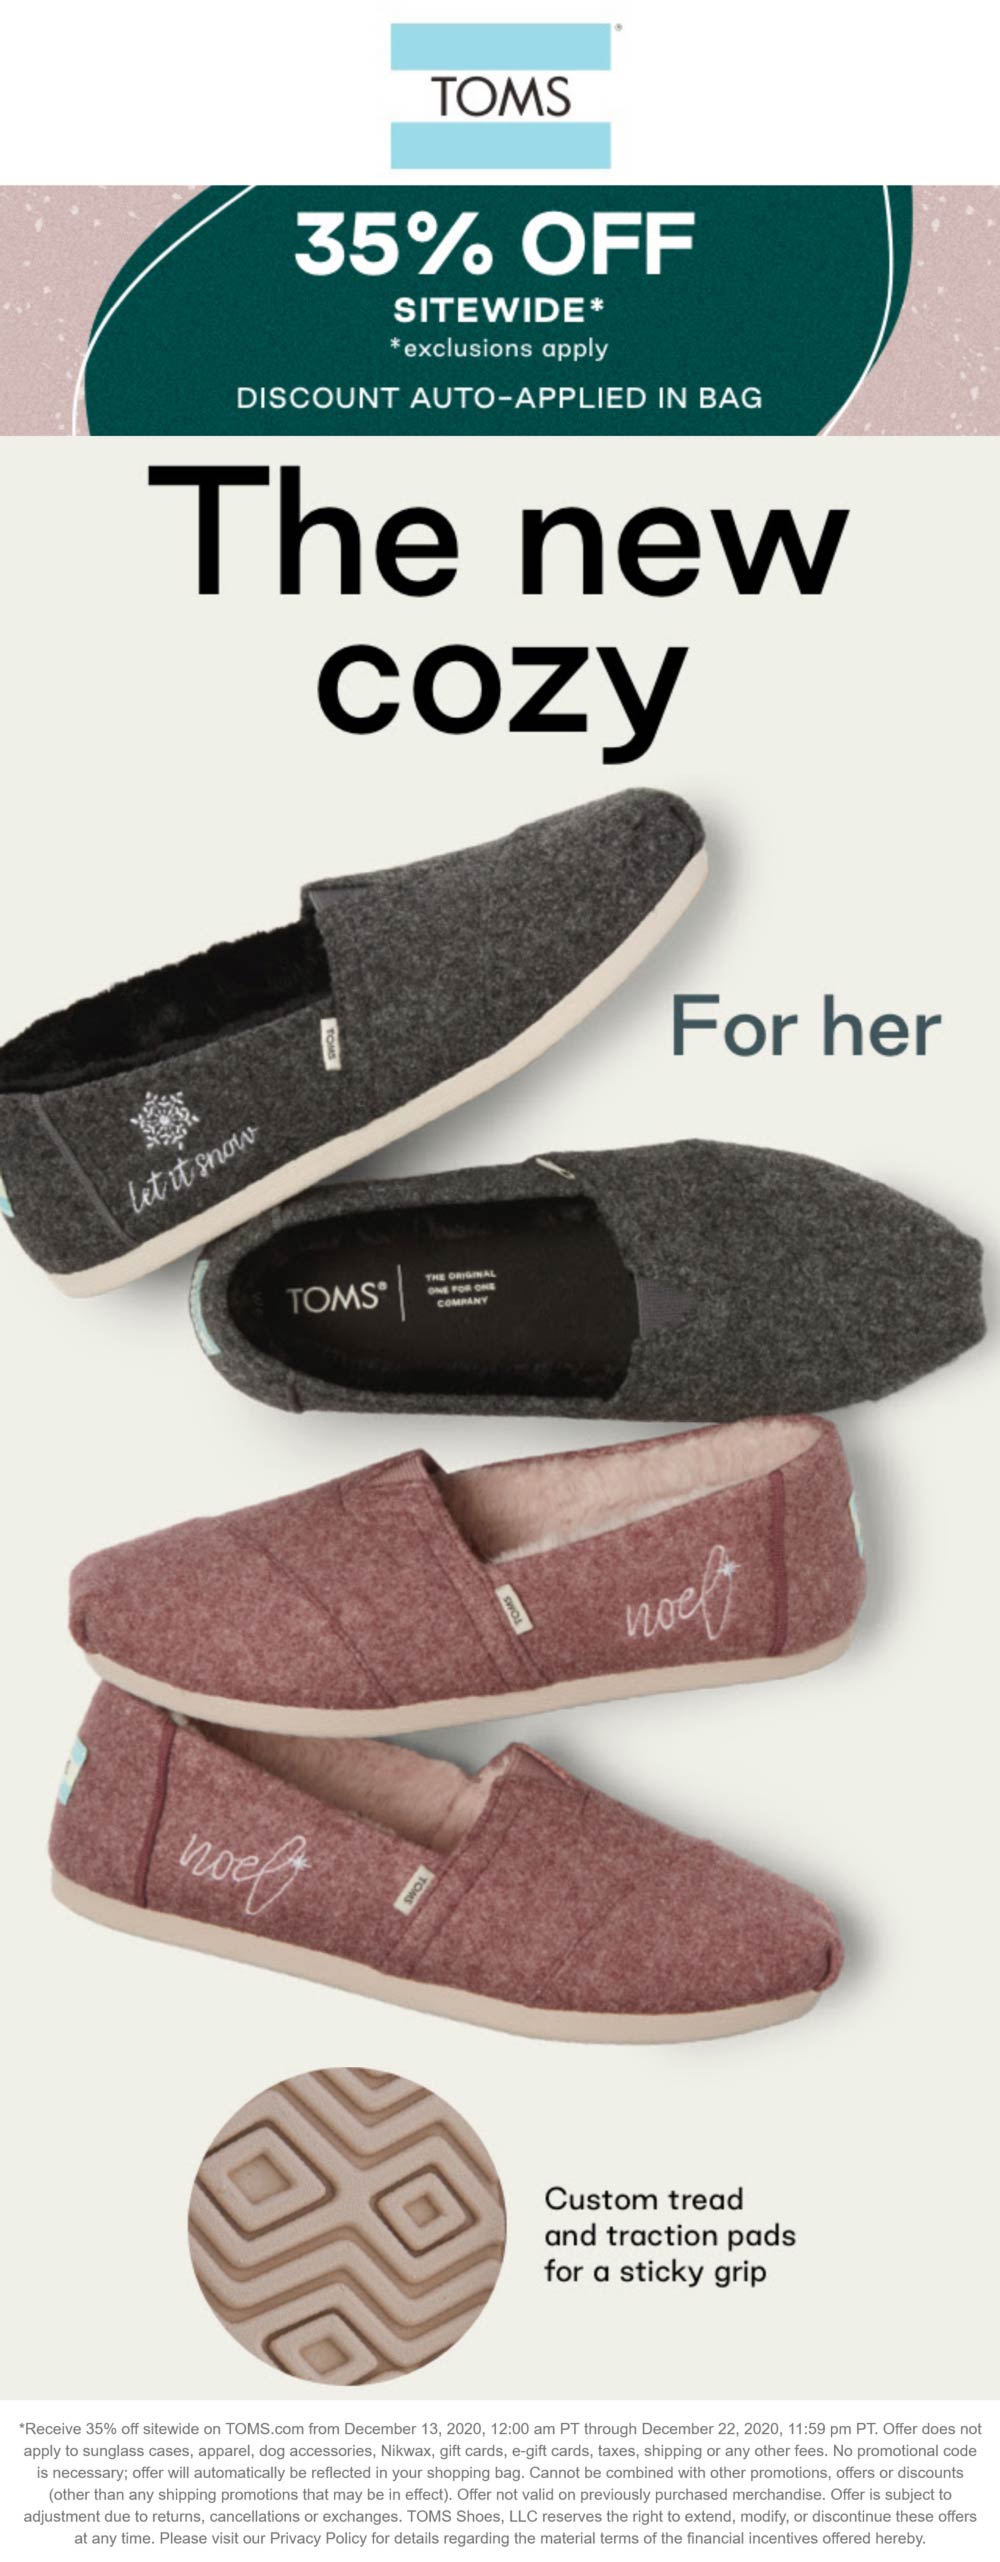 Toms stores Coupon  35% off everything at Toms shoes #toms 